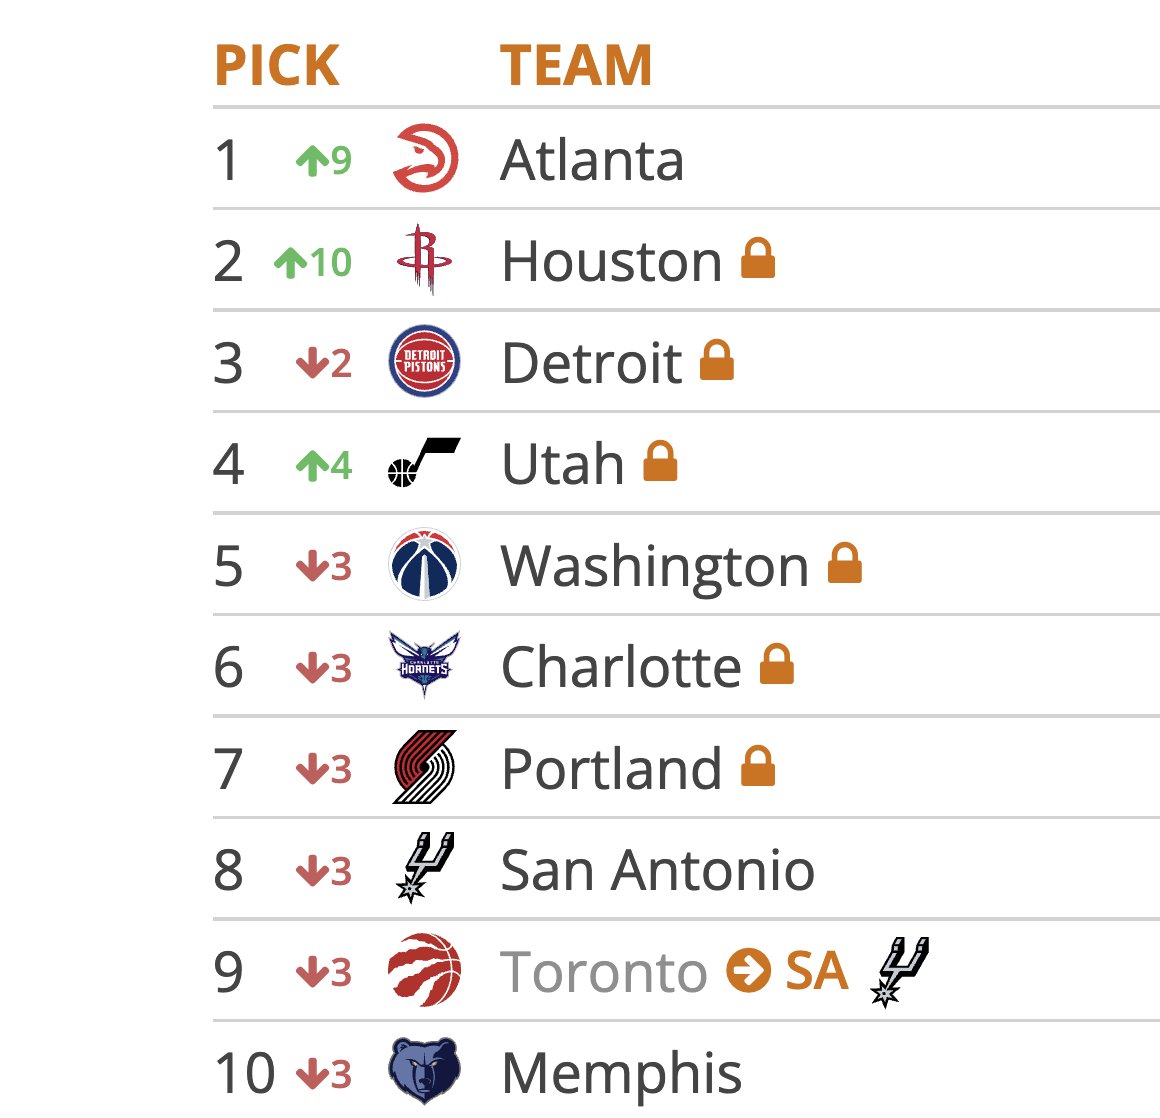 One hour until the Lottery

tankathon.com

Final official simulation gets wild: